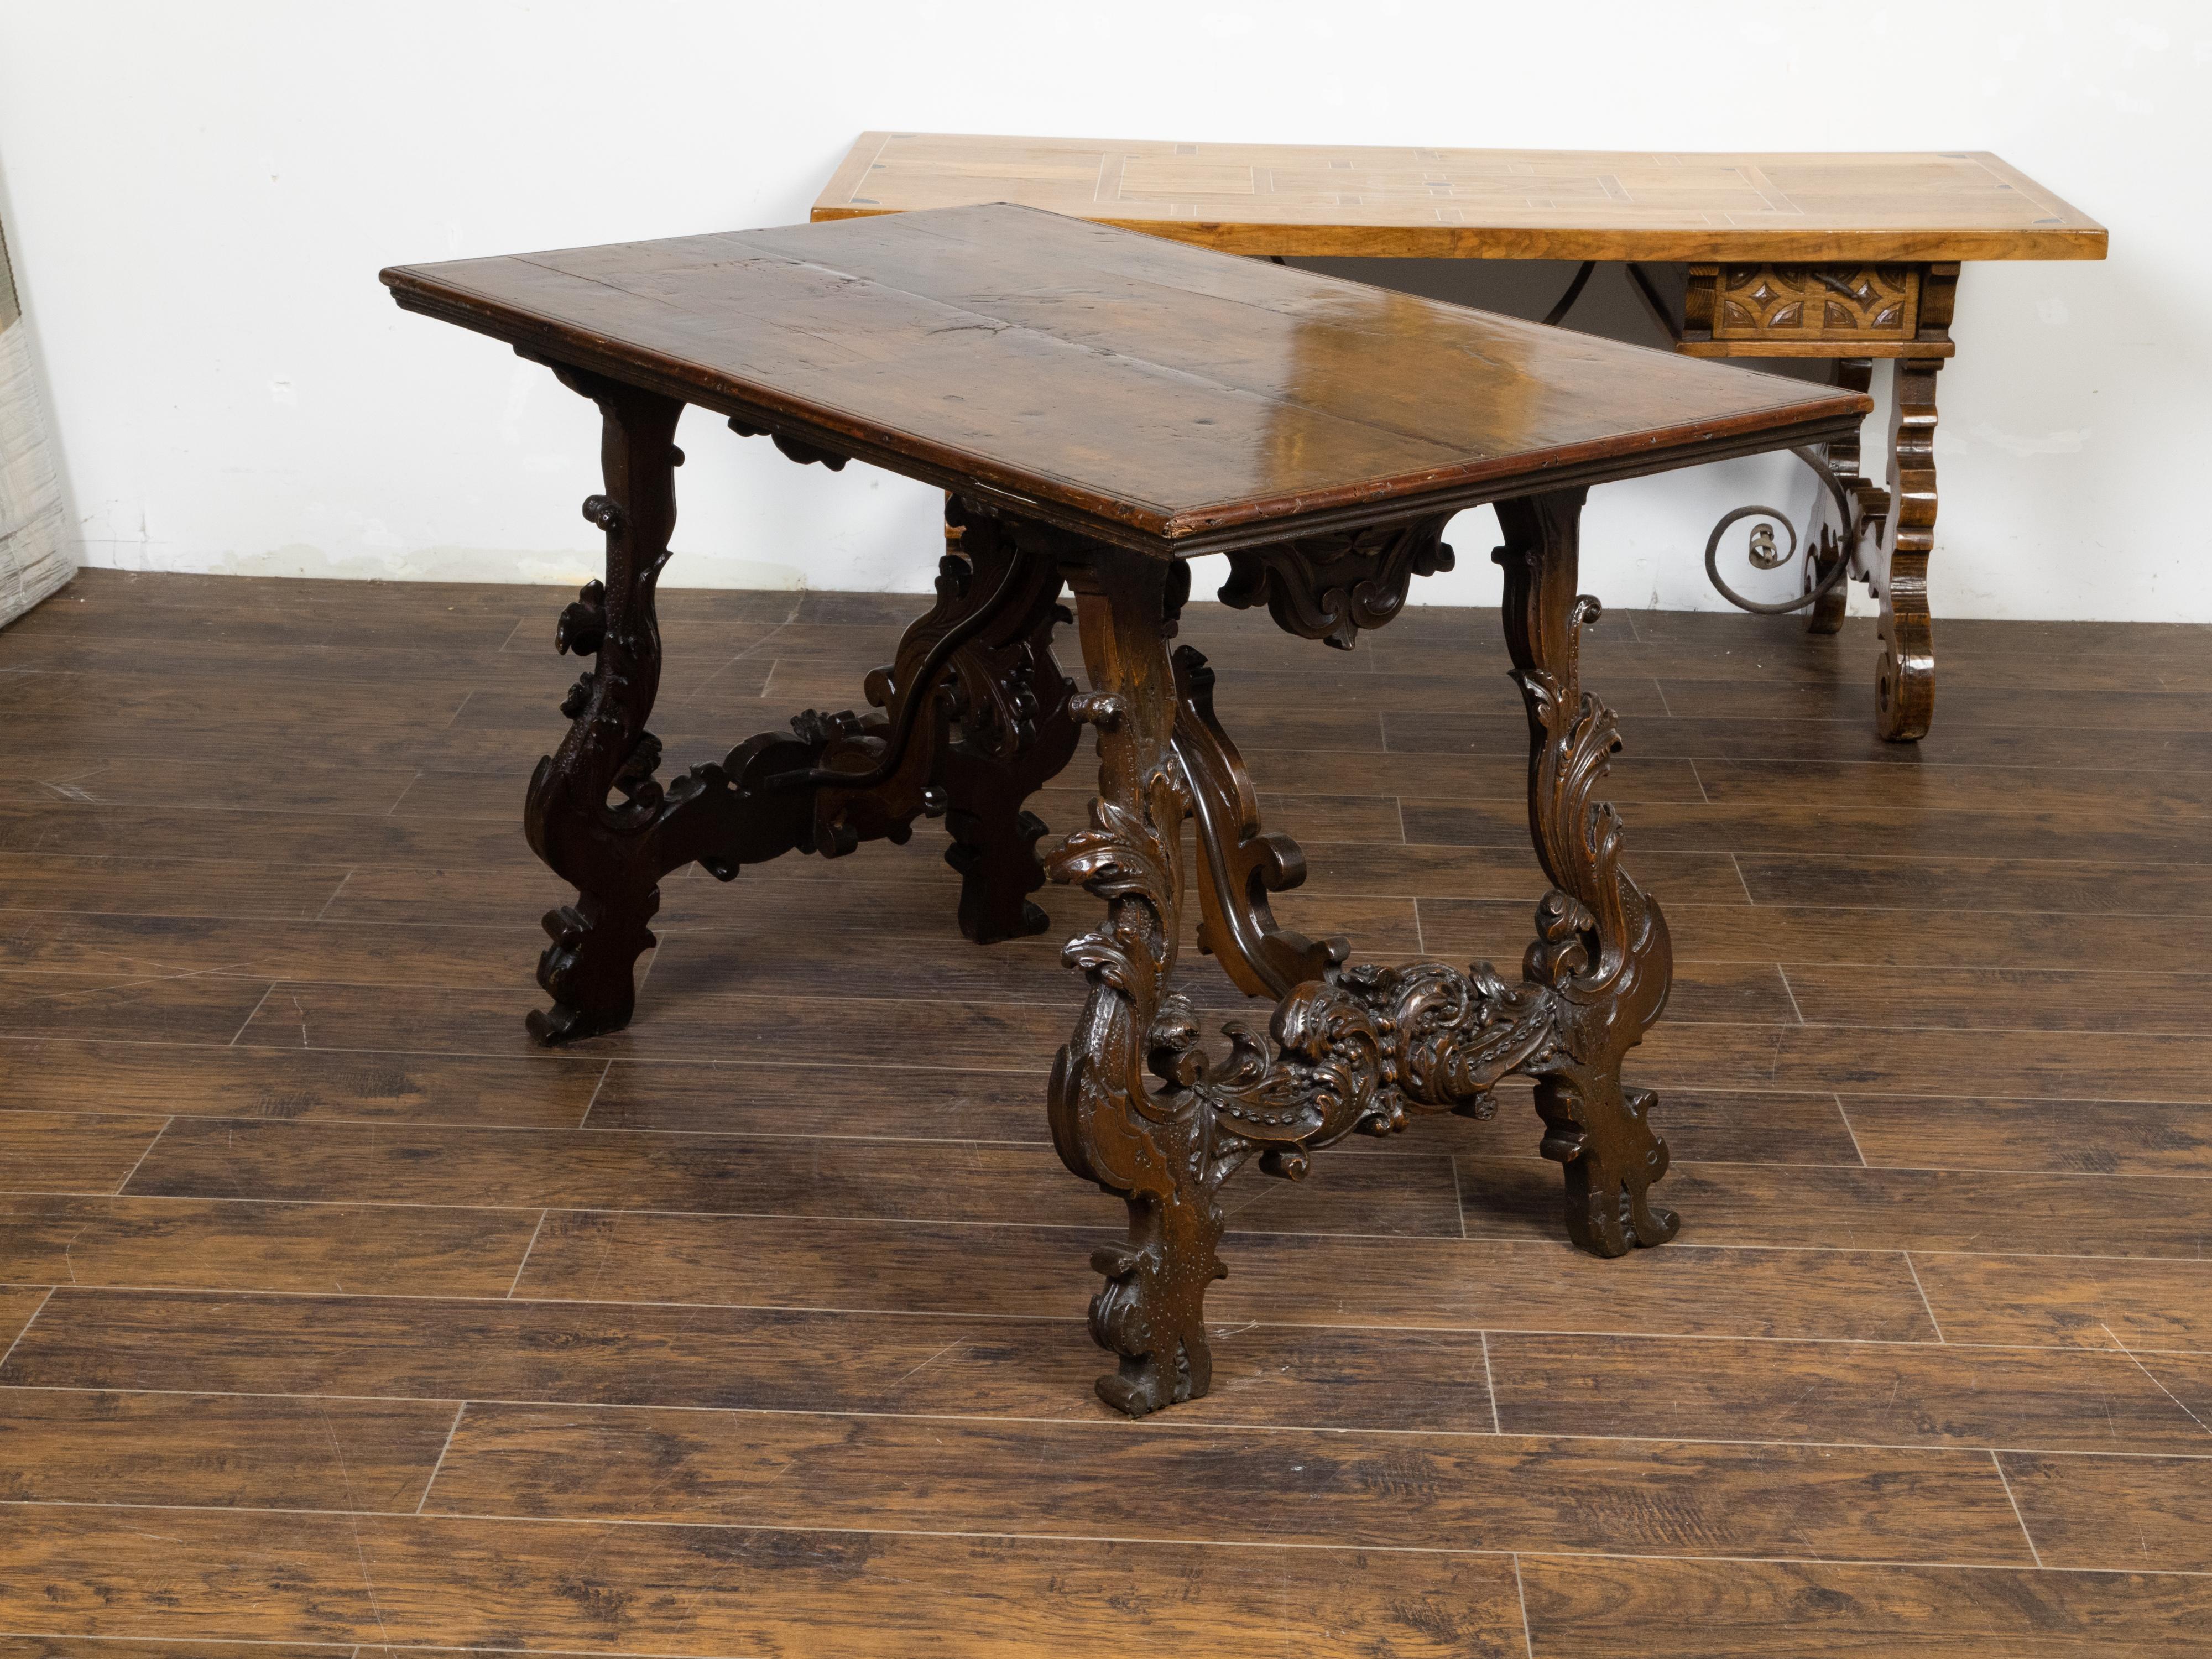 An Italian Baroque style walnut Fratino console table from the 18th century, with carved lyre-shaped trestle base, scrolling foliage motifs, dolphin feet and dark brown patina. Created in Italy during the lively 18th century, this Baroque walnut